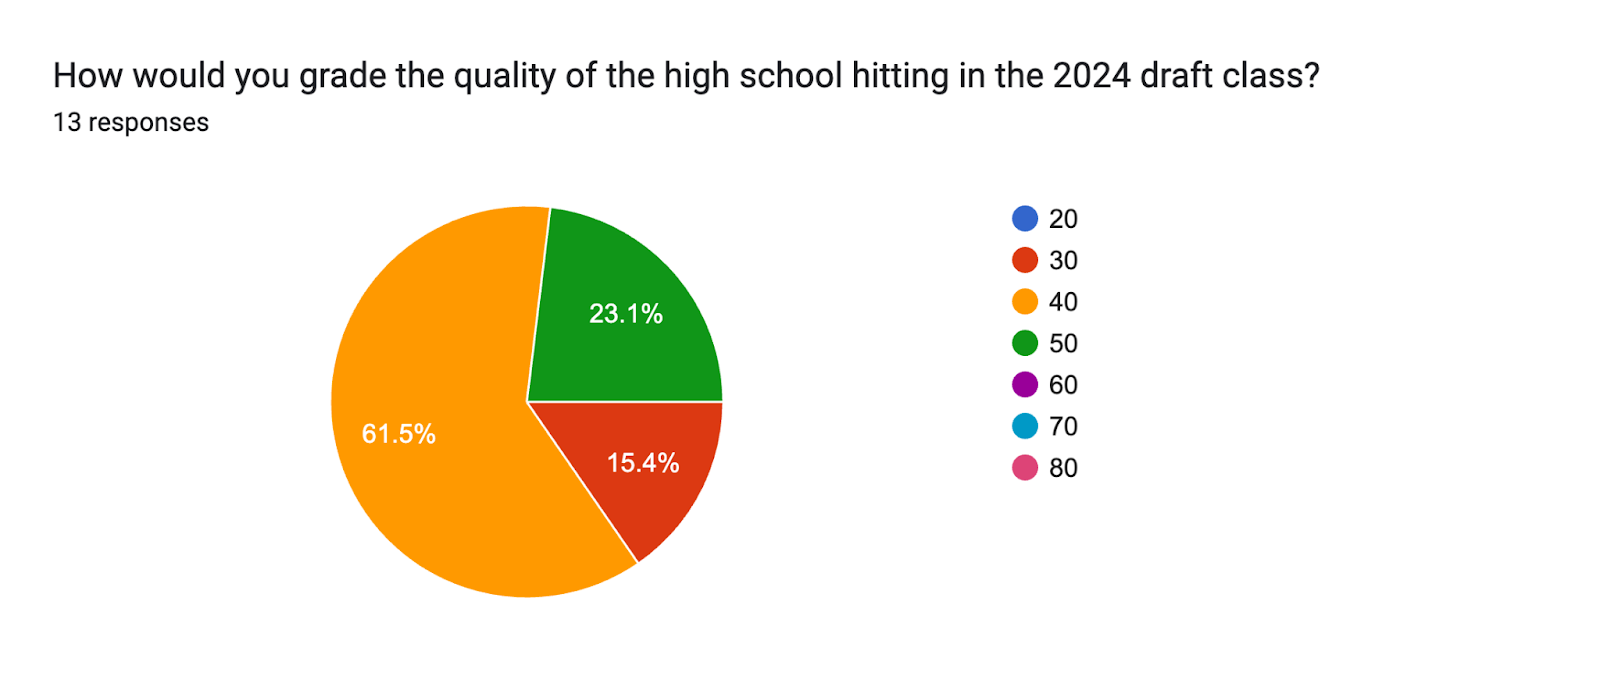 Forms response chart. Question title: How would you grade the quality of the high school hitting in the 2024 draft class?. Number of responses: 13 responses.